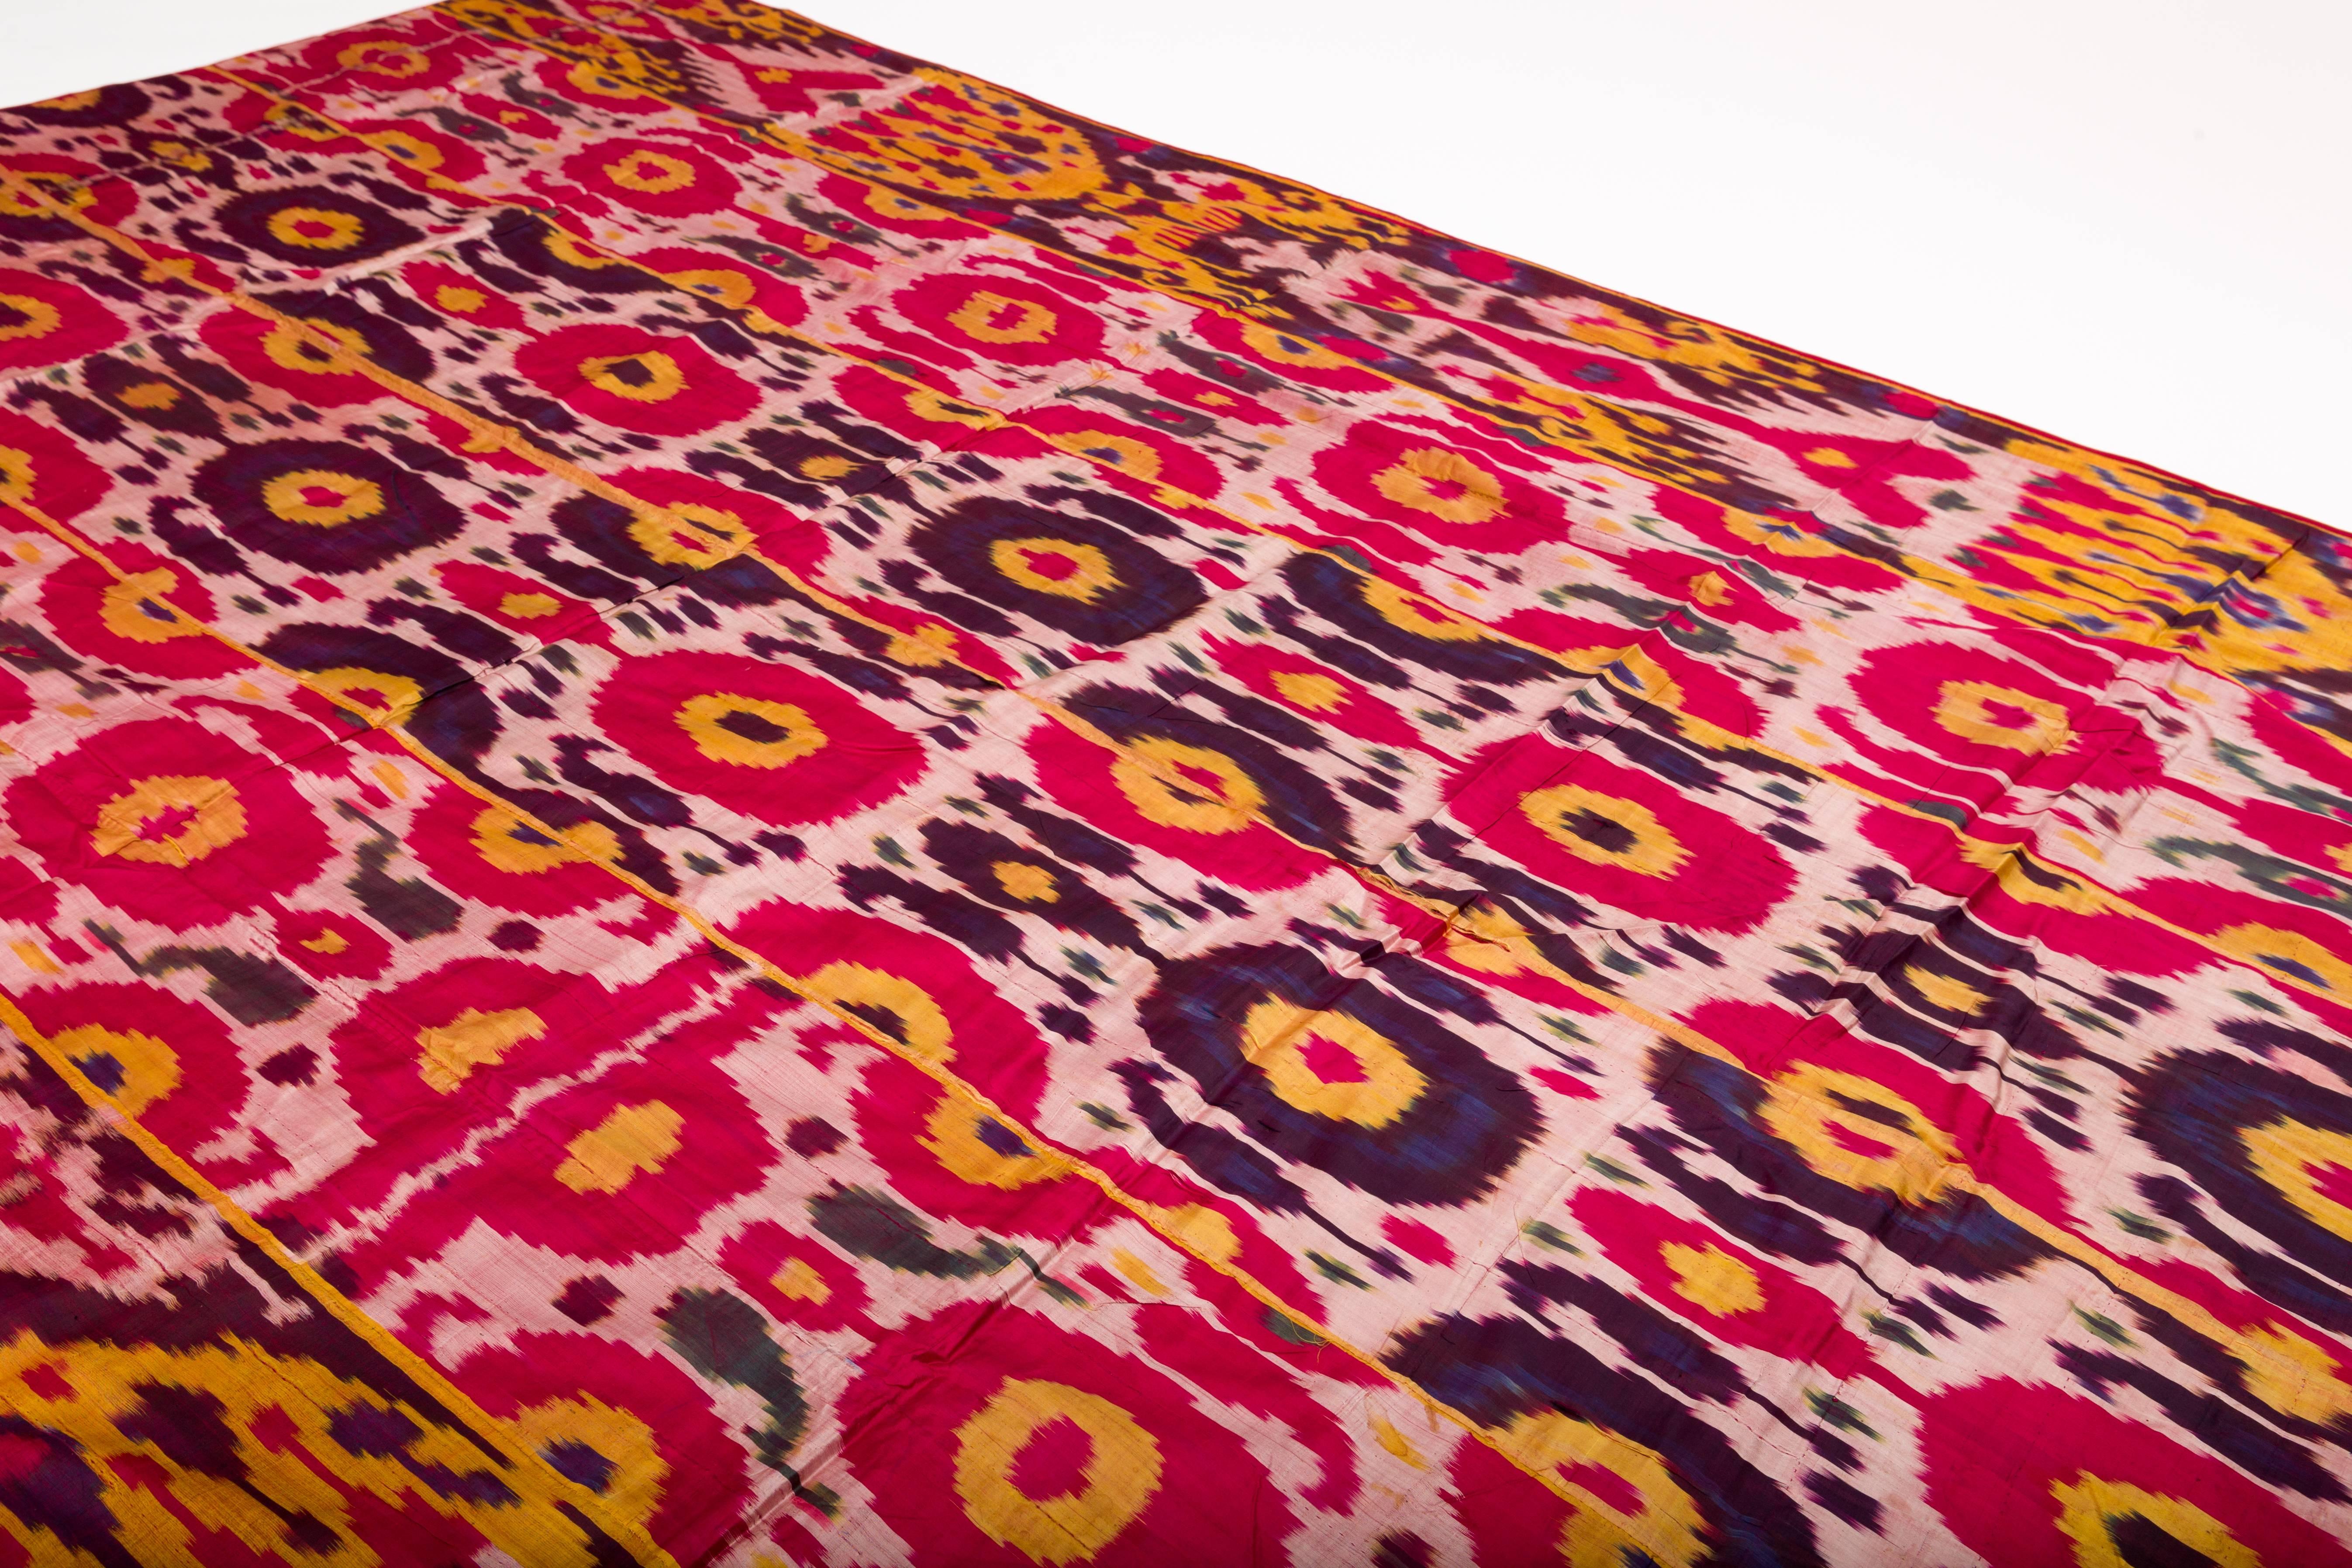 Gorgeous handwoven silk Ikat weaving in rich magenta, gold and purple color, circa late 19th-early 20th century, Uzbekistan, Central Asia, on the ancient Silk Route. Hand-sewn original magenta exotic Victorian cotton backing.